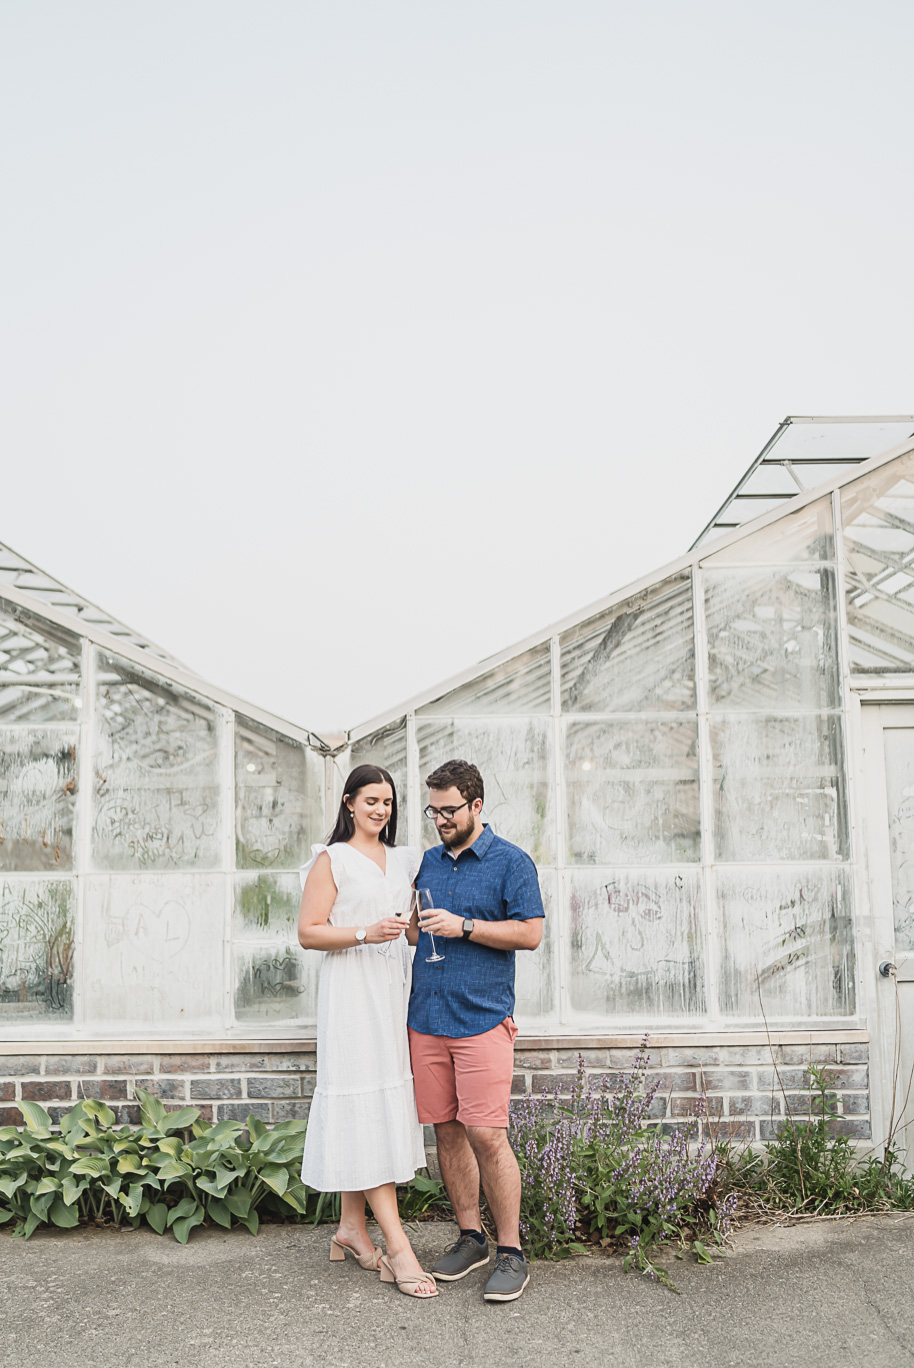 A stunning Belle Isle engagement session in Detroit, Michigan by top-rated Detroit wedding photographer Kari Dawson.